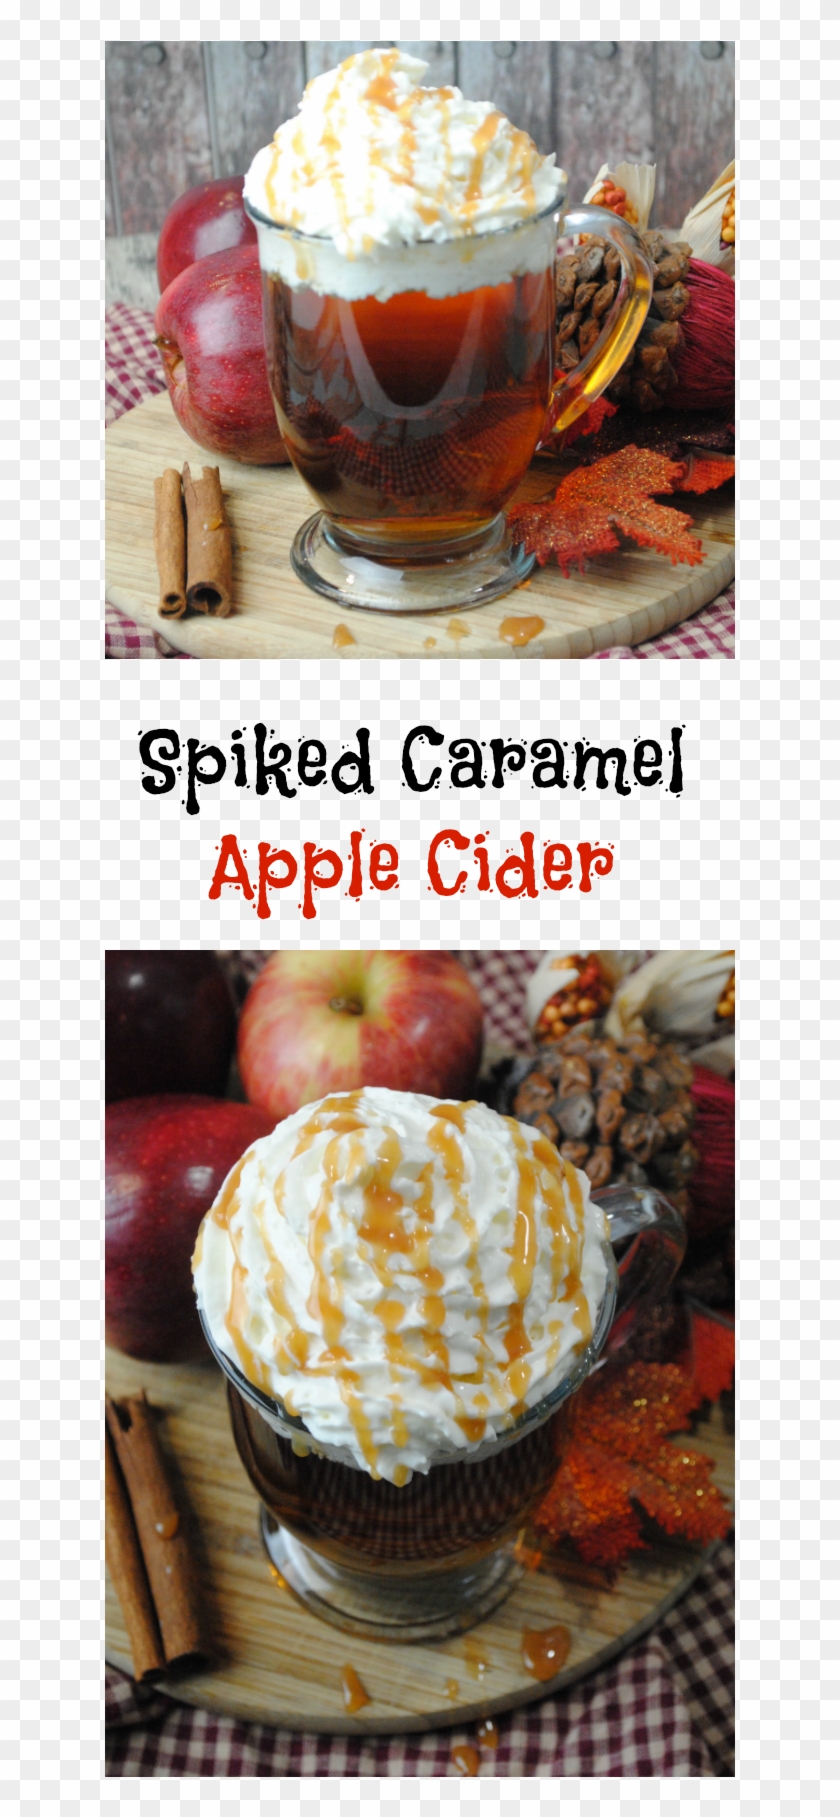 We Have Already Shared Some Apple Cider Donuts, Crock - Natural Foods Clipart #5245302